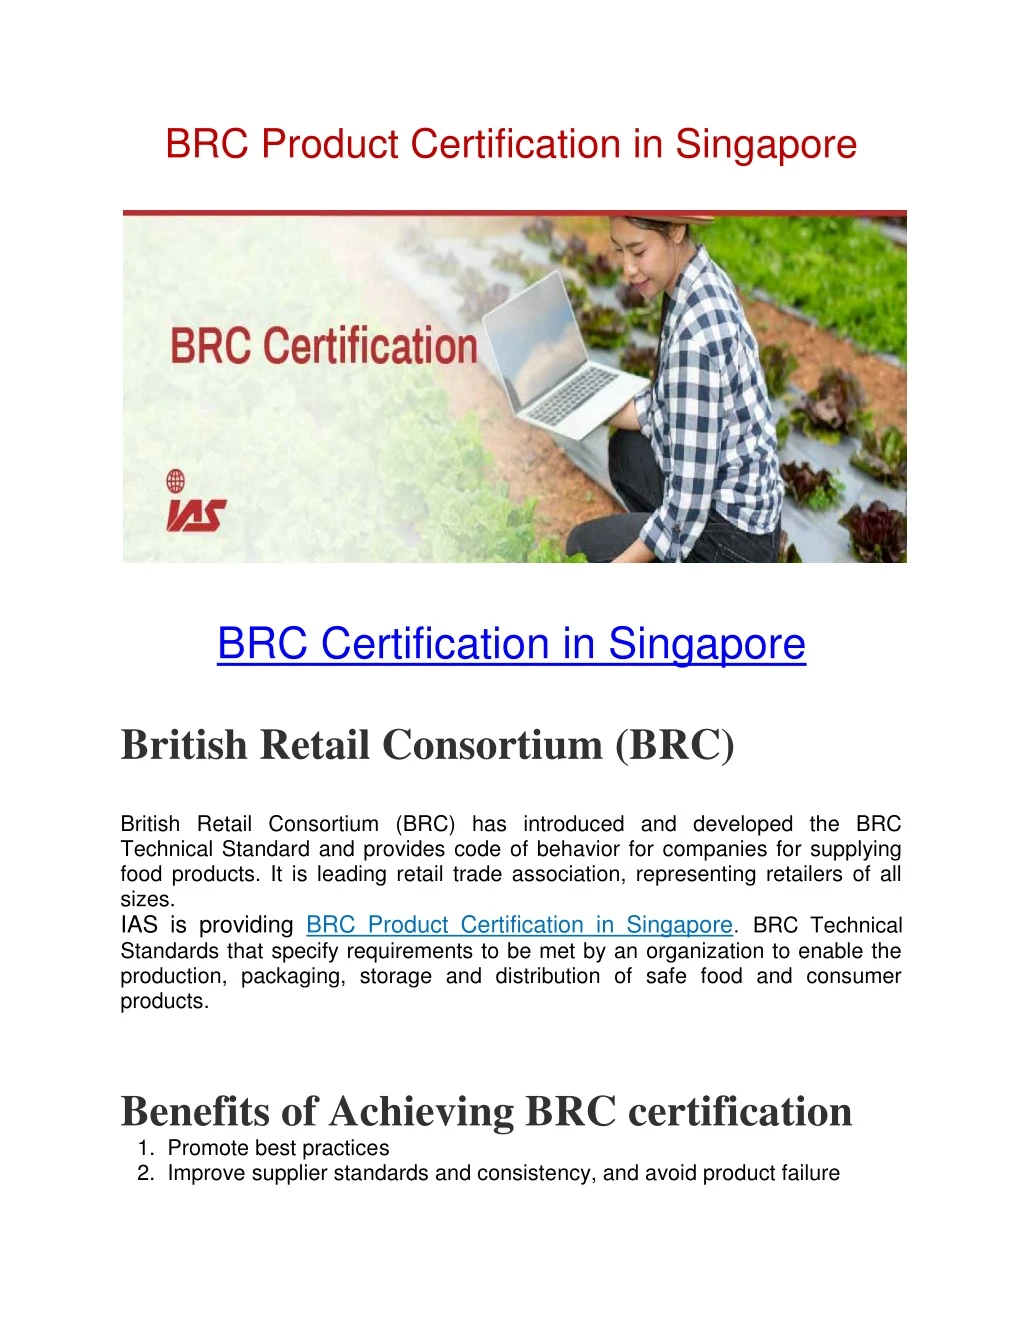 brc product certification in singapore